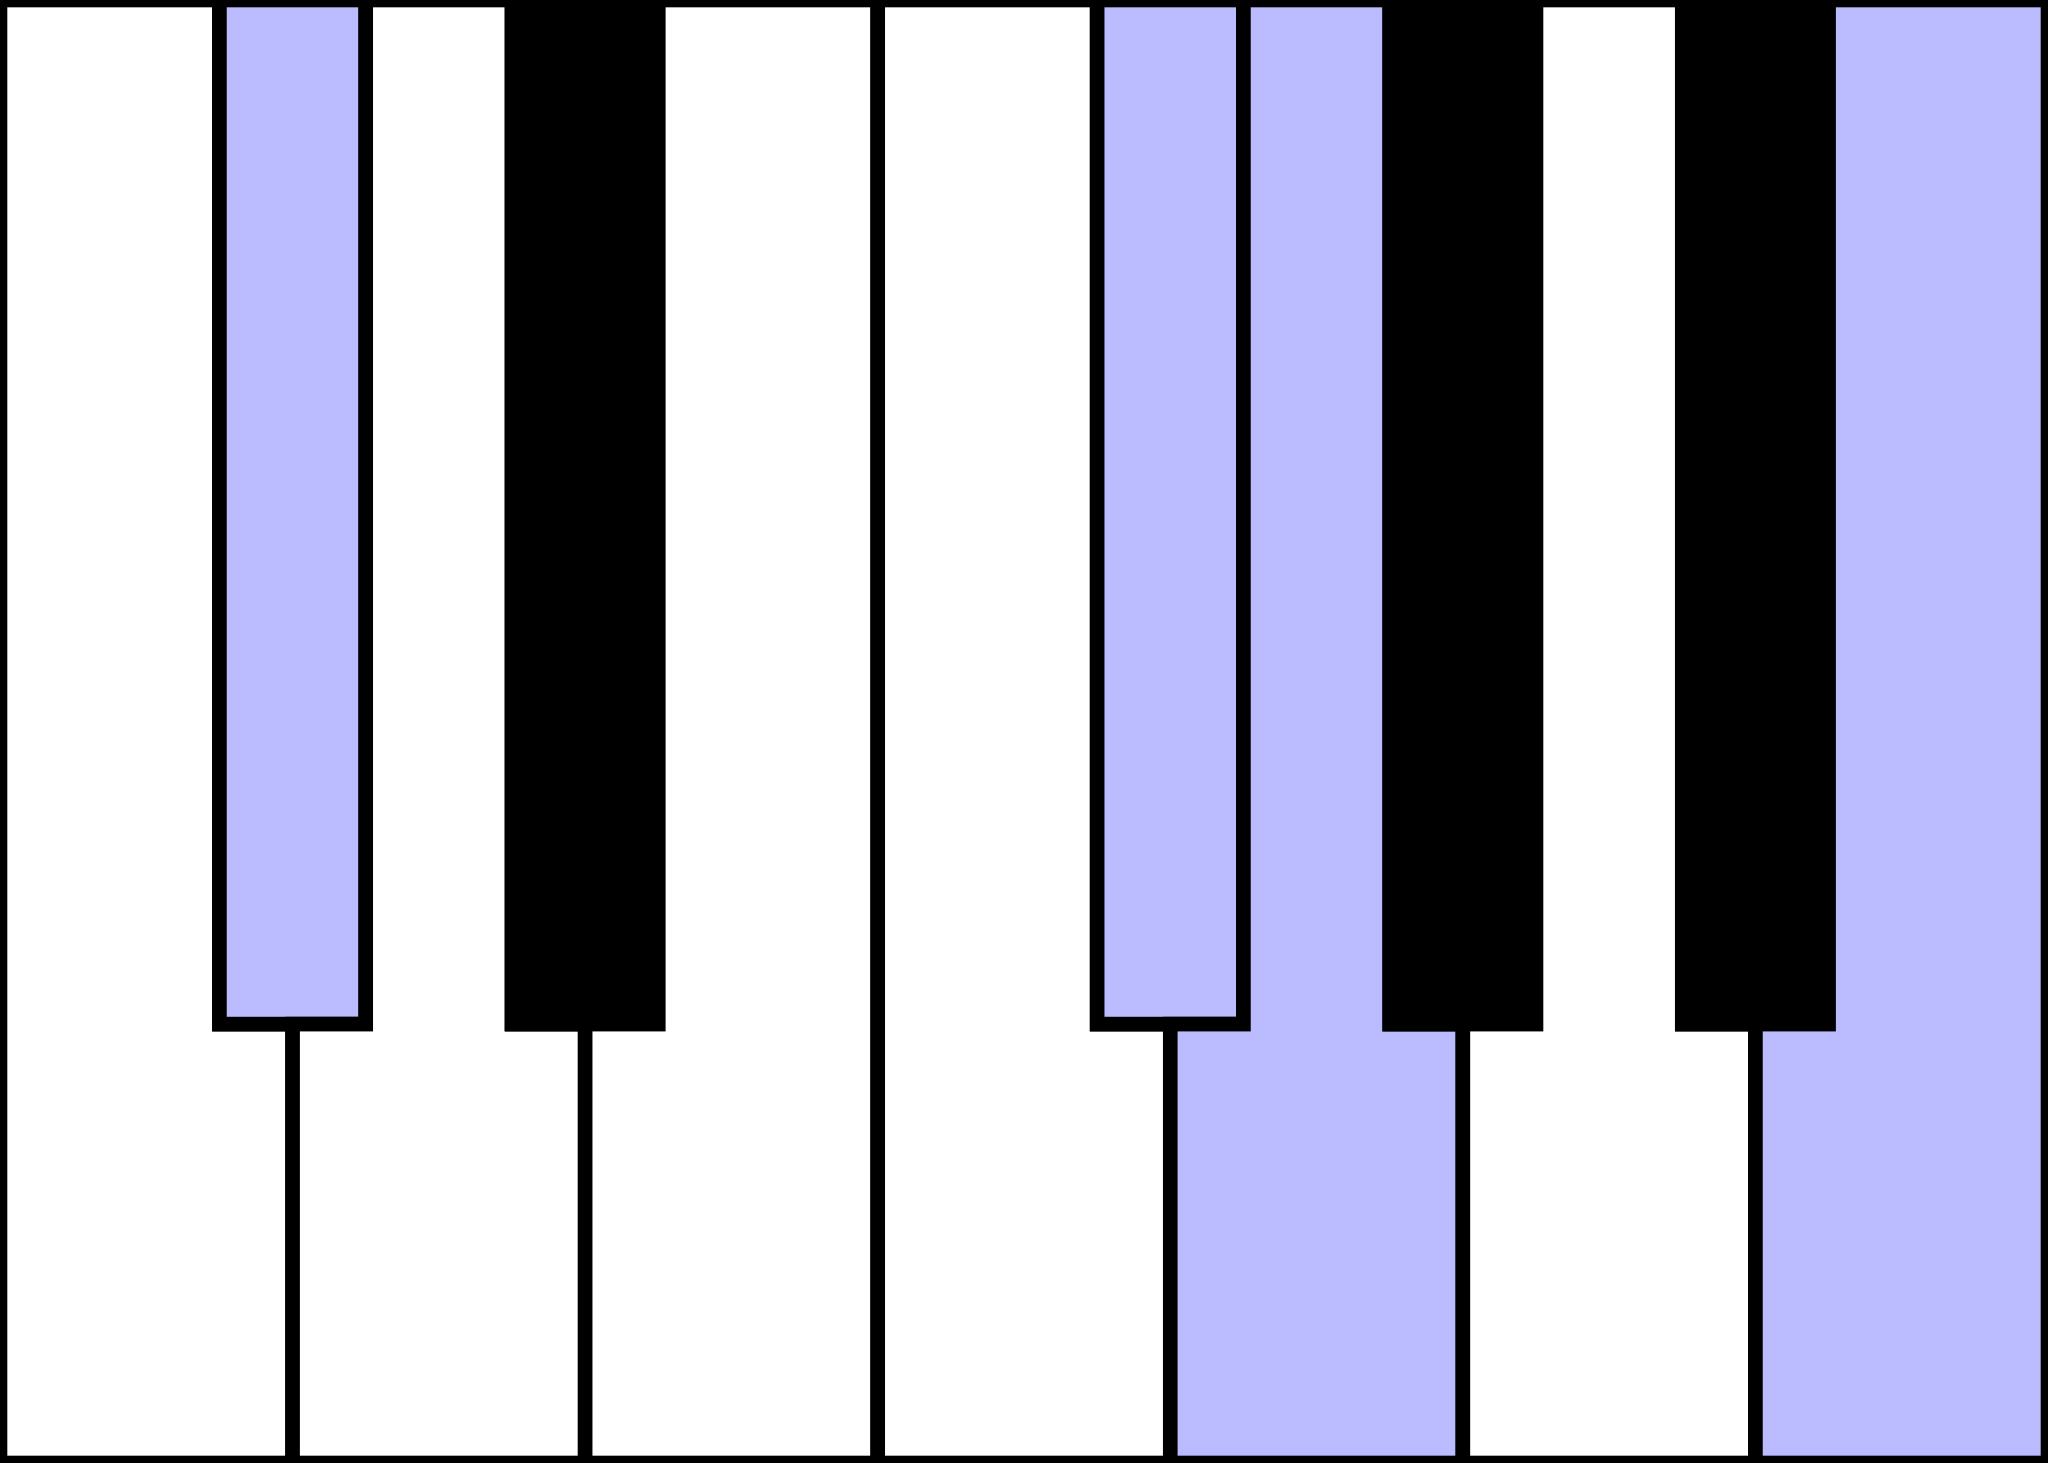 Free Images - pianochord gm7 5 svg.